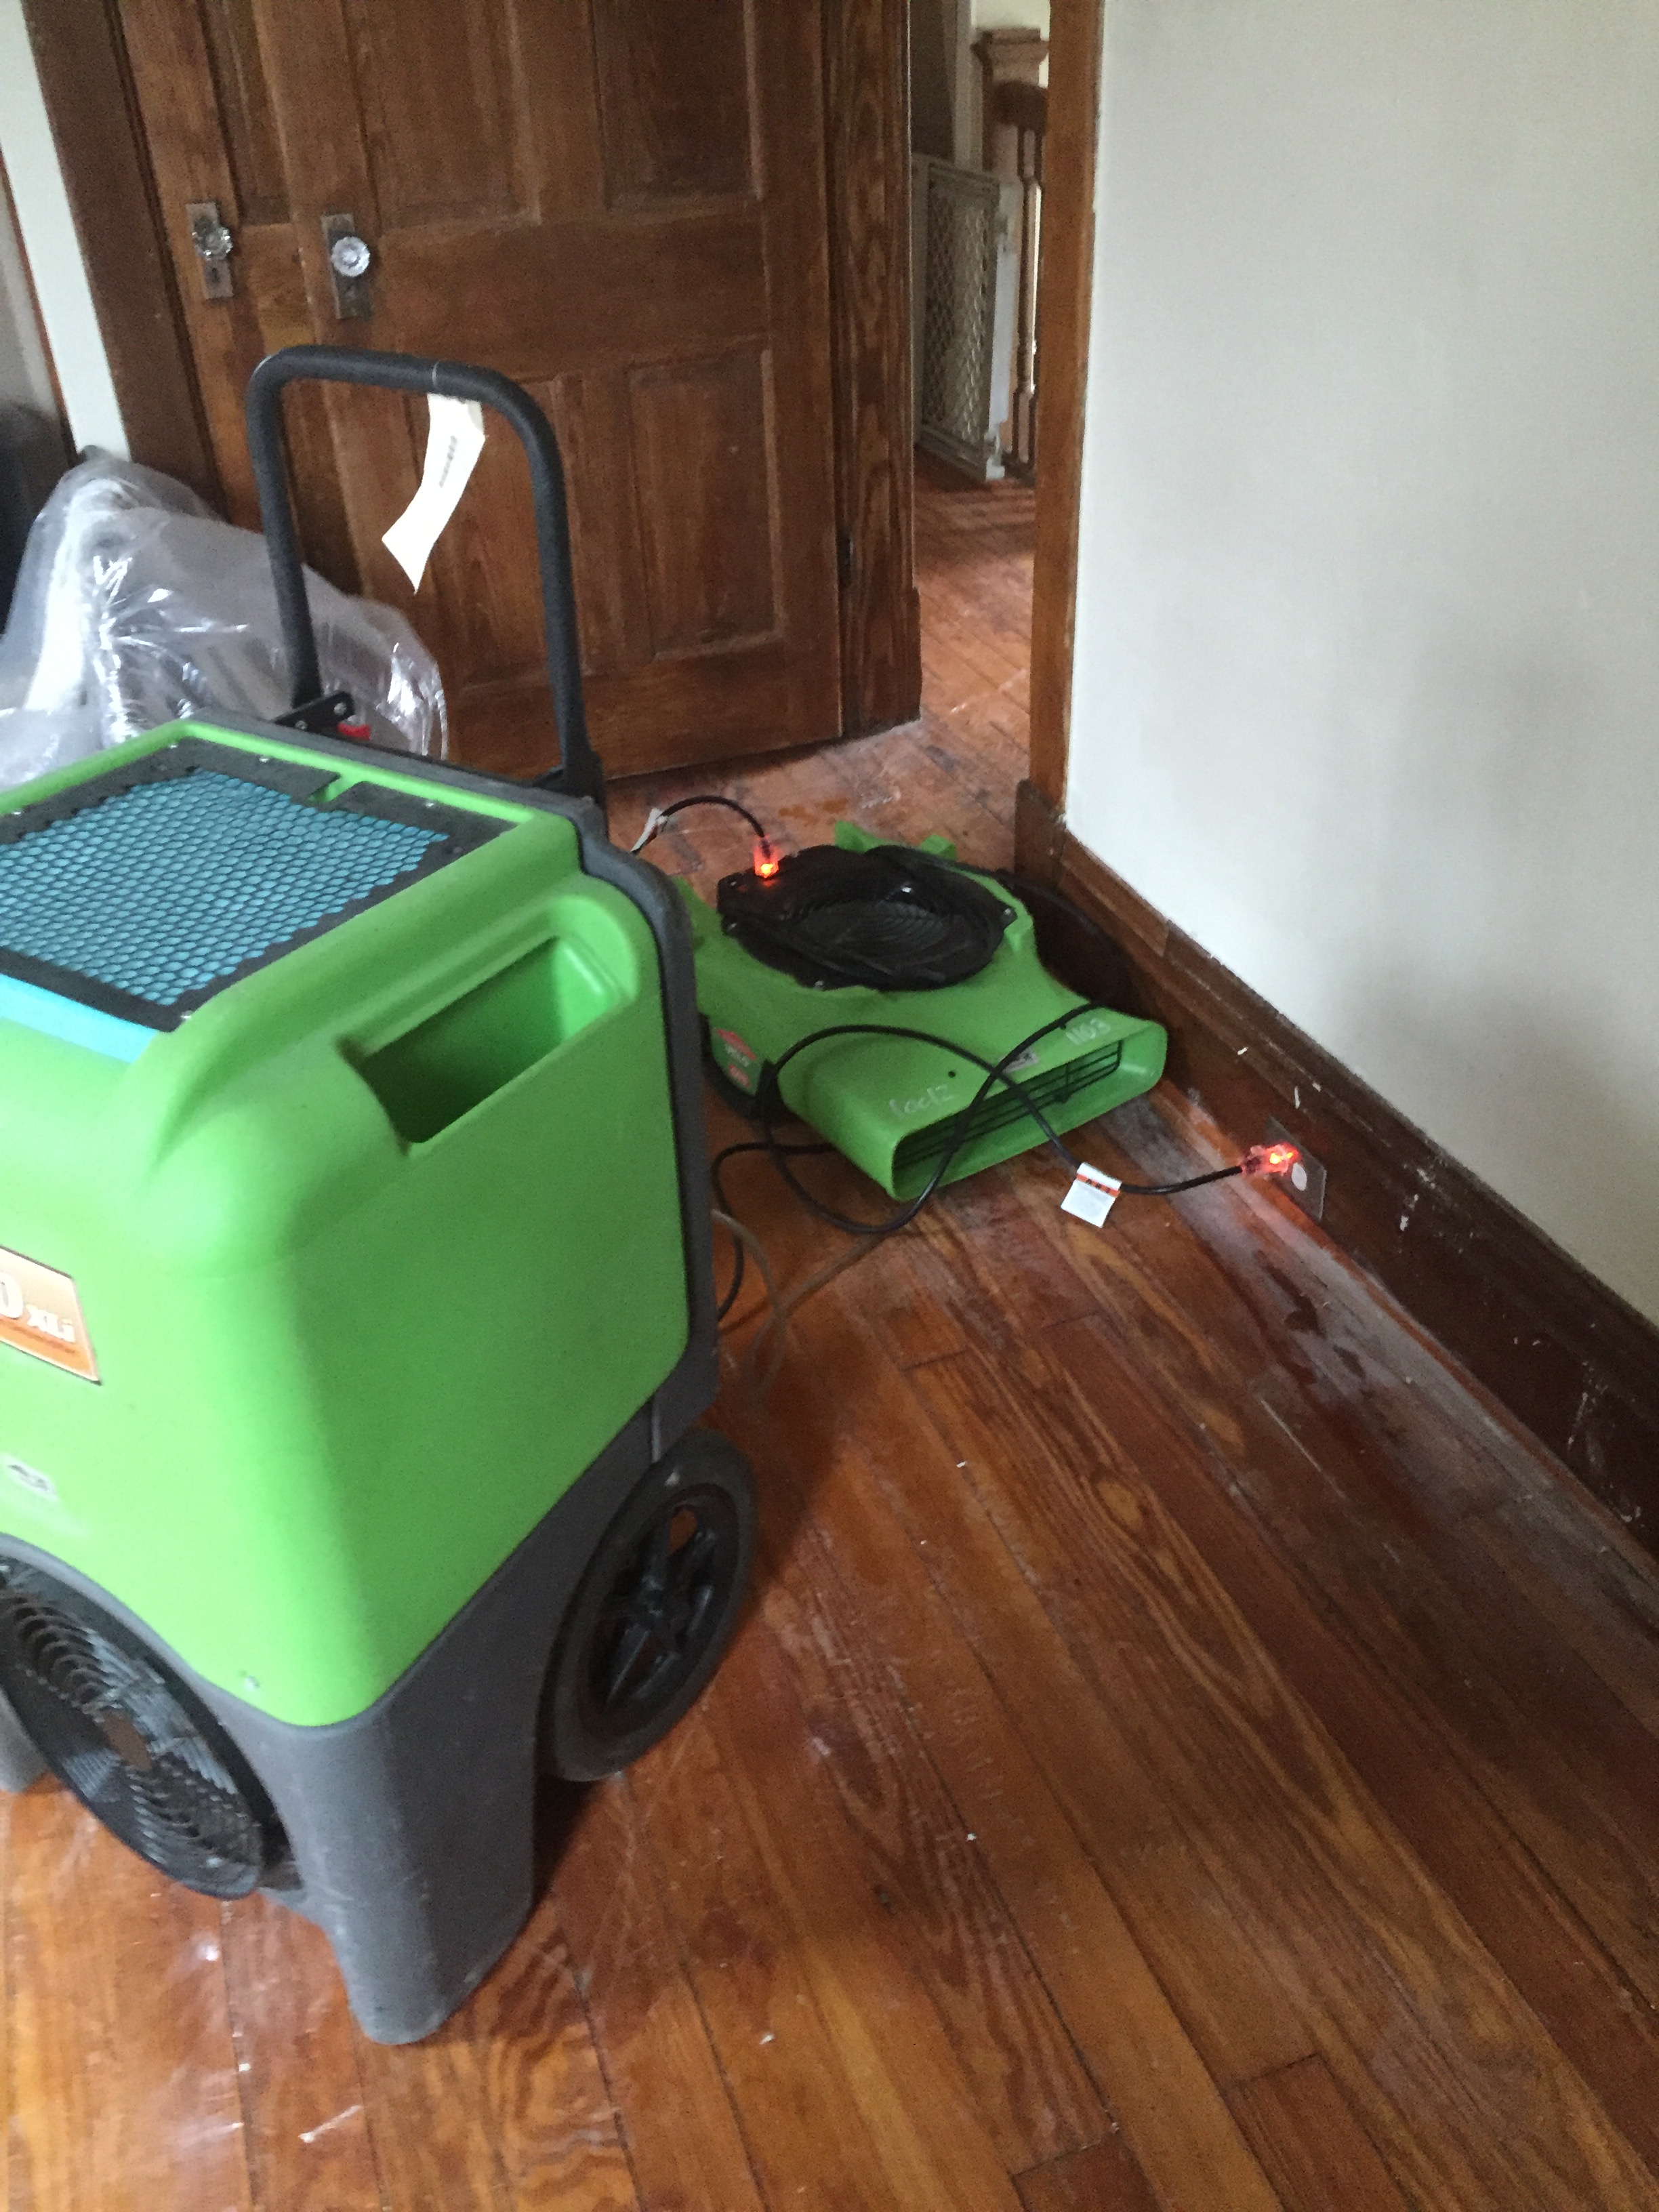 Got our SERVPRO equipment up and running after a water loss!